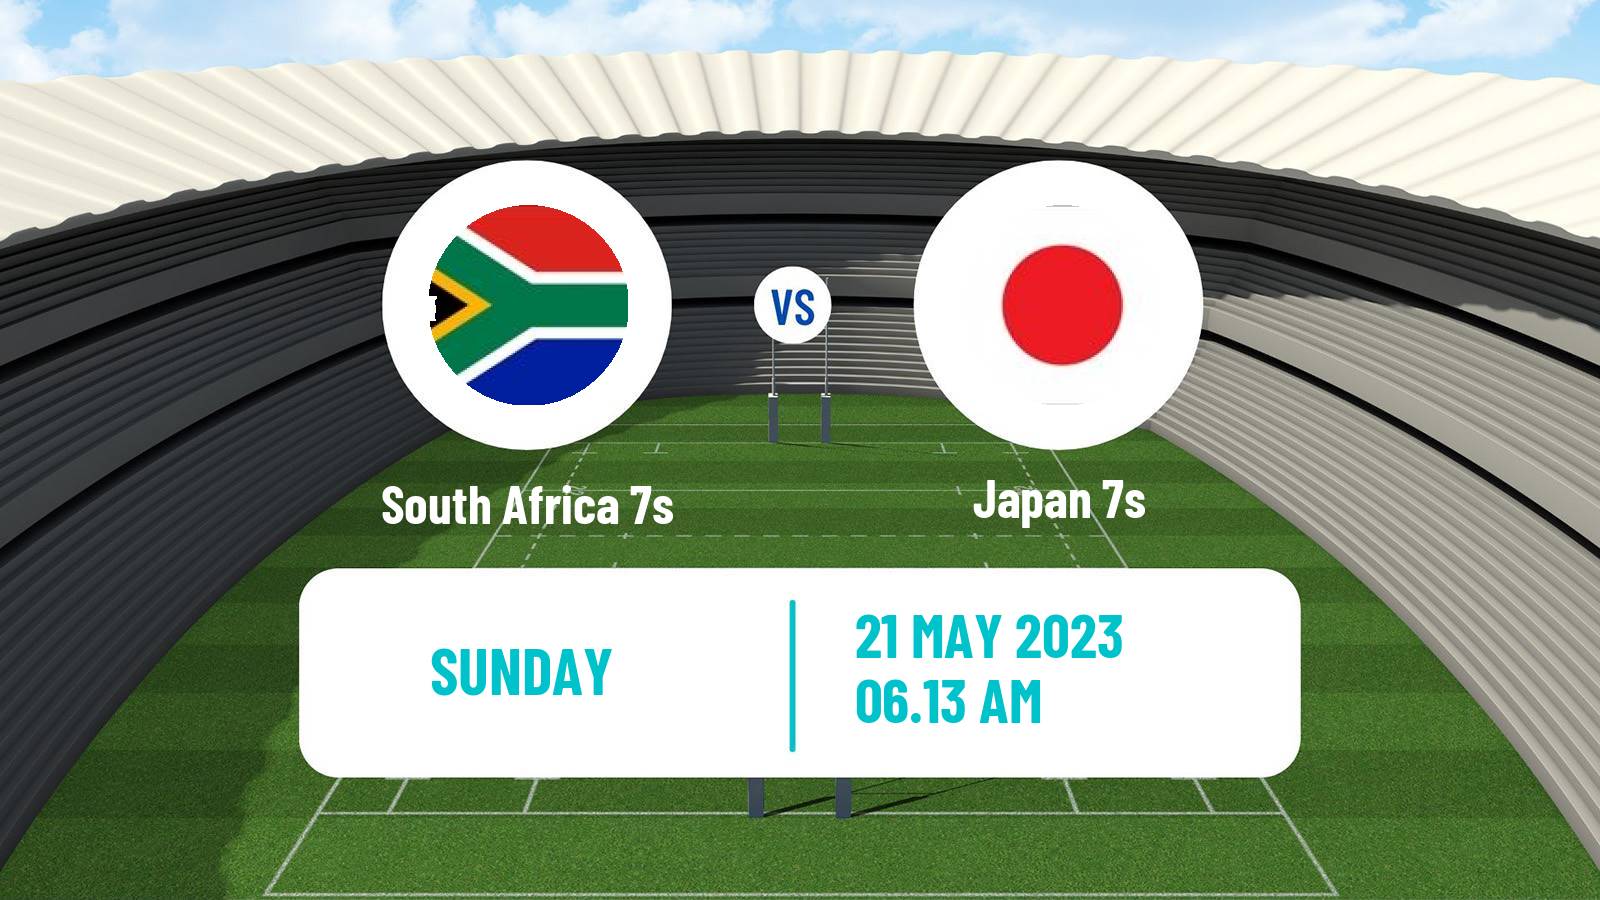 Rugby union Sevens World Series - England South Africa 7s - Japan 7s